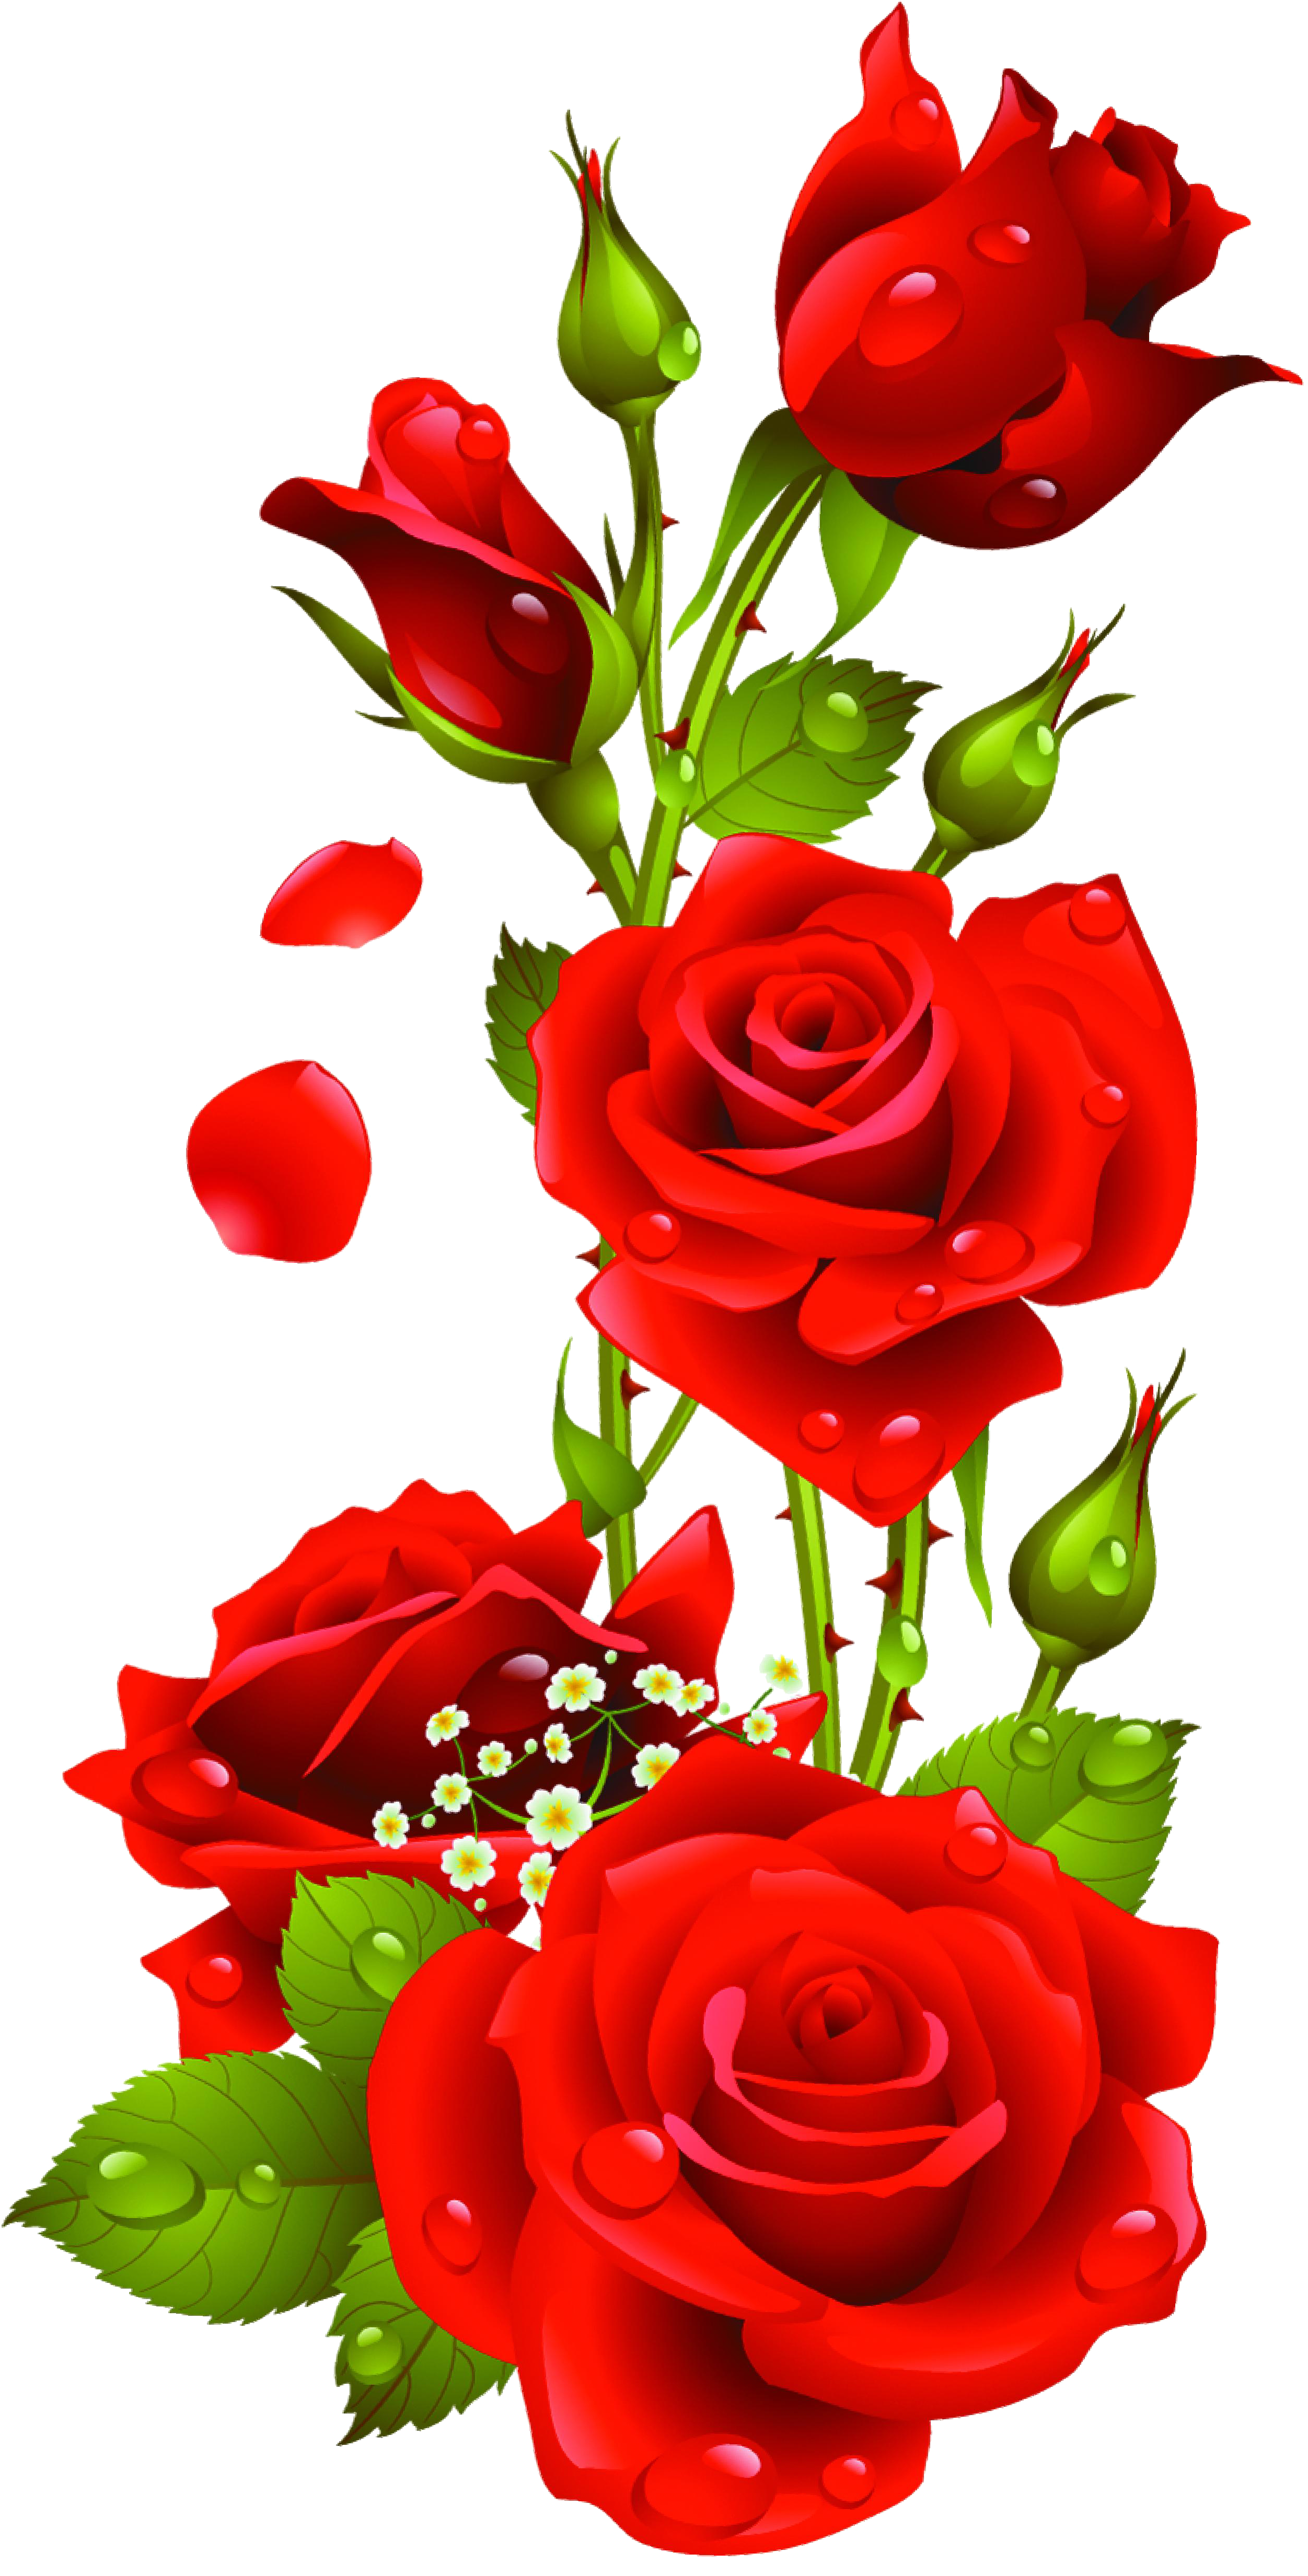 Hd Rose Image In Our System PNG Transparent Background, Free Download  #18992 - FreeIconsPNG